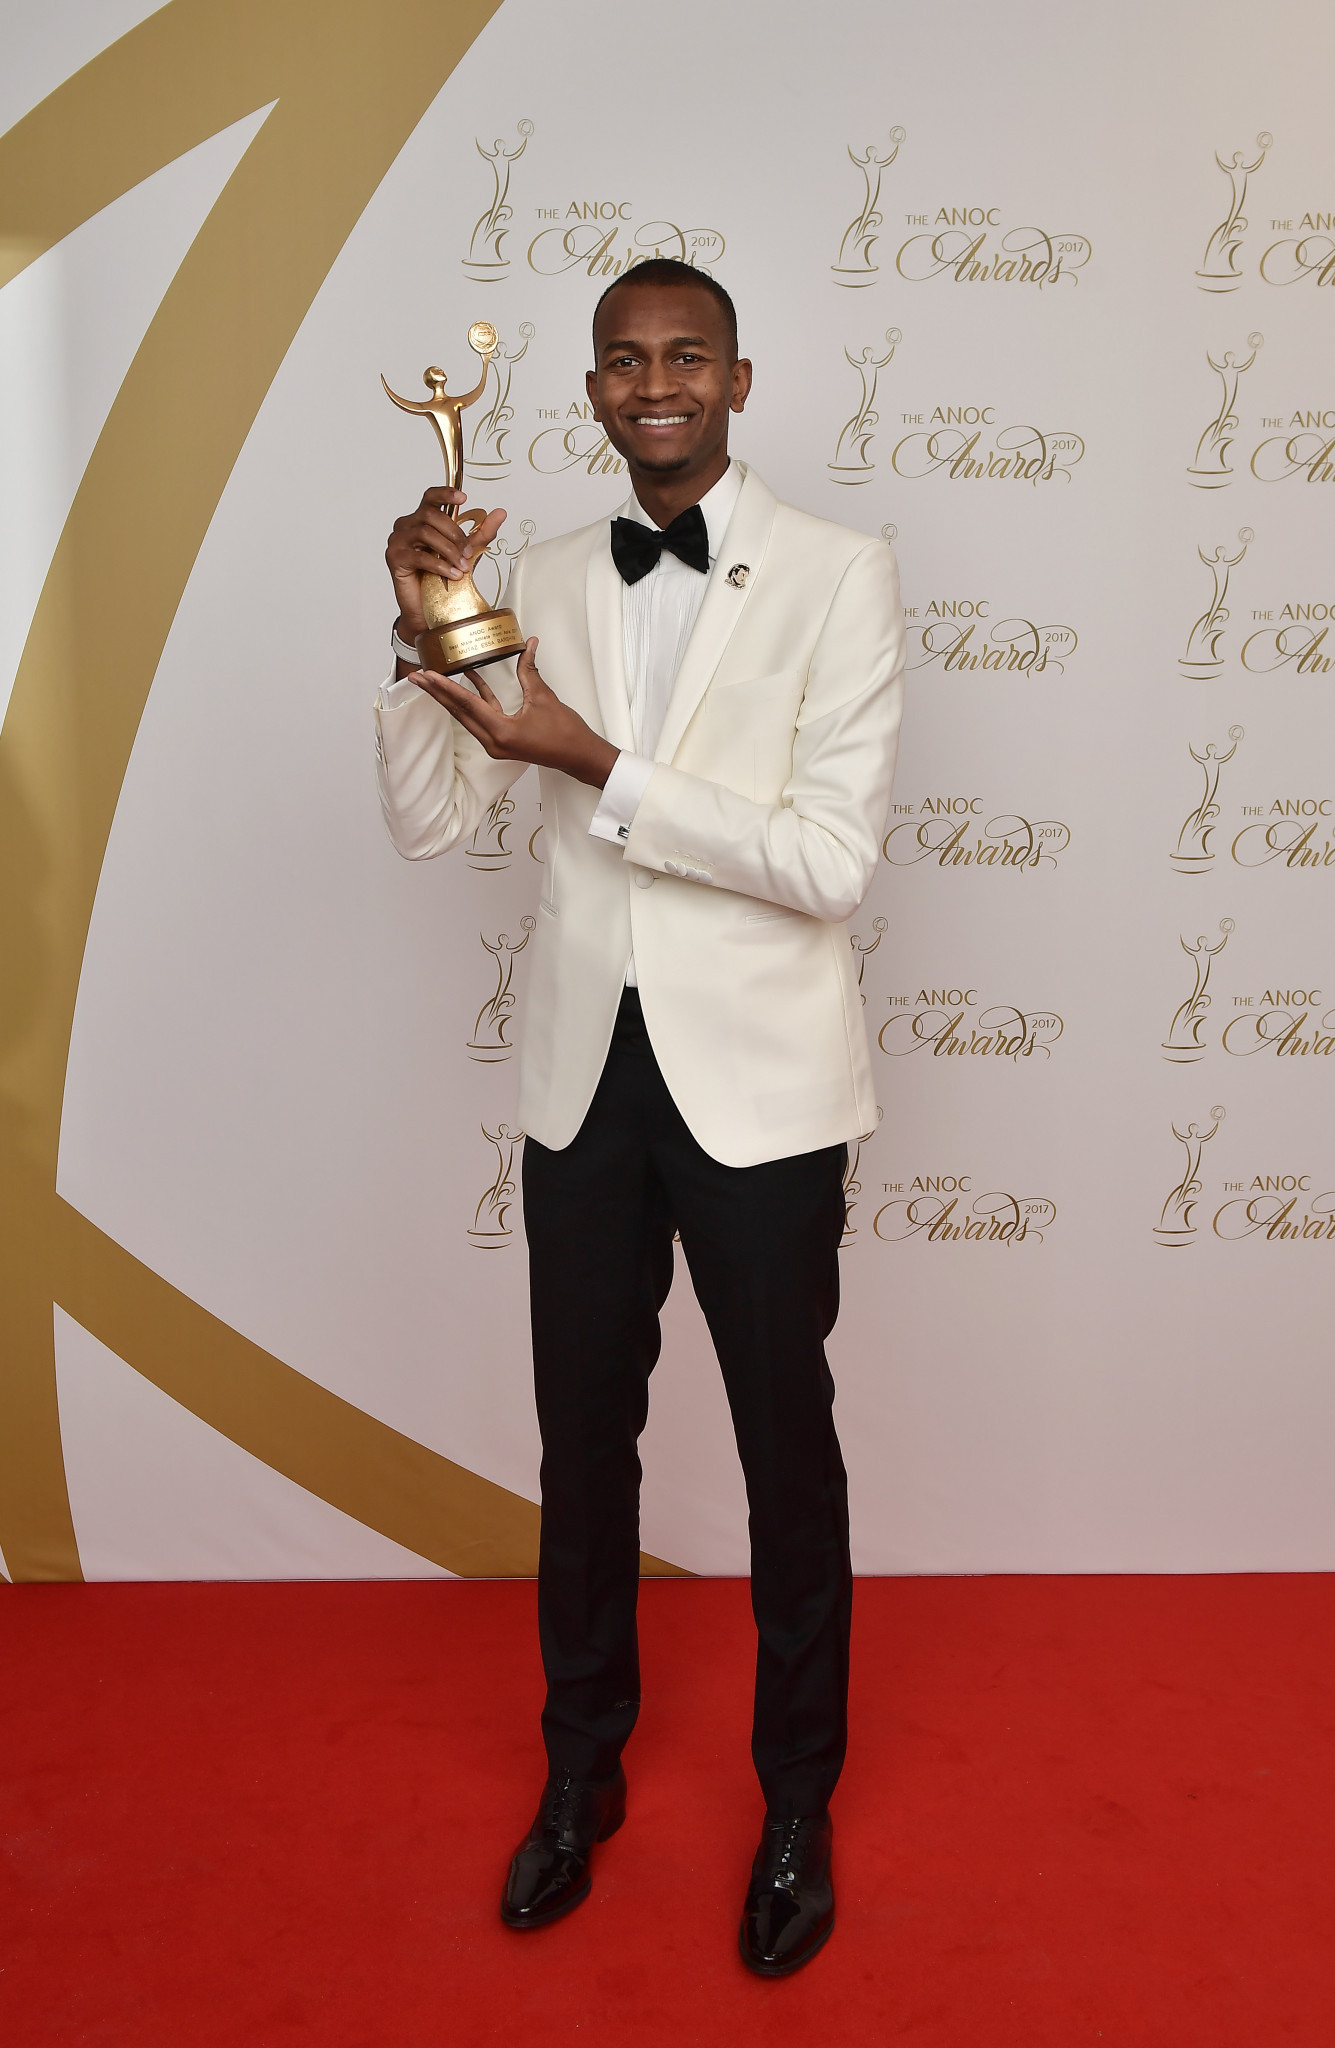 Mutaz Essa Barshim of Qatar, pictured with the Association of National Olympic Committees' award for Best Male Asian Athlete 2017 at its general assembly in Prague, is among the finalists for Male World Athlete of the Year ©Getty Images